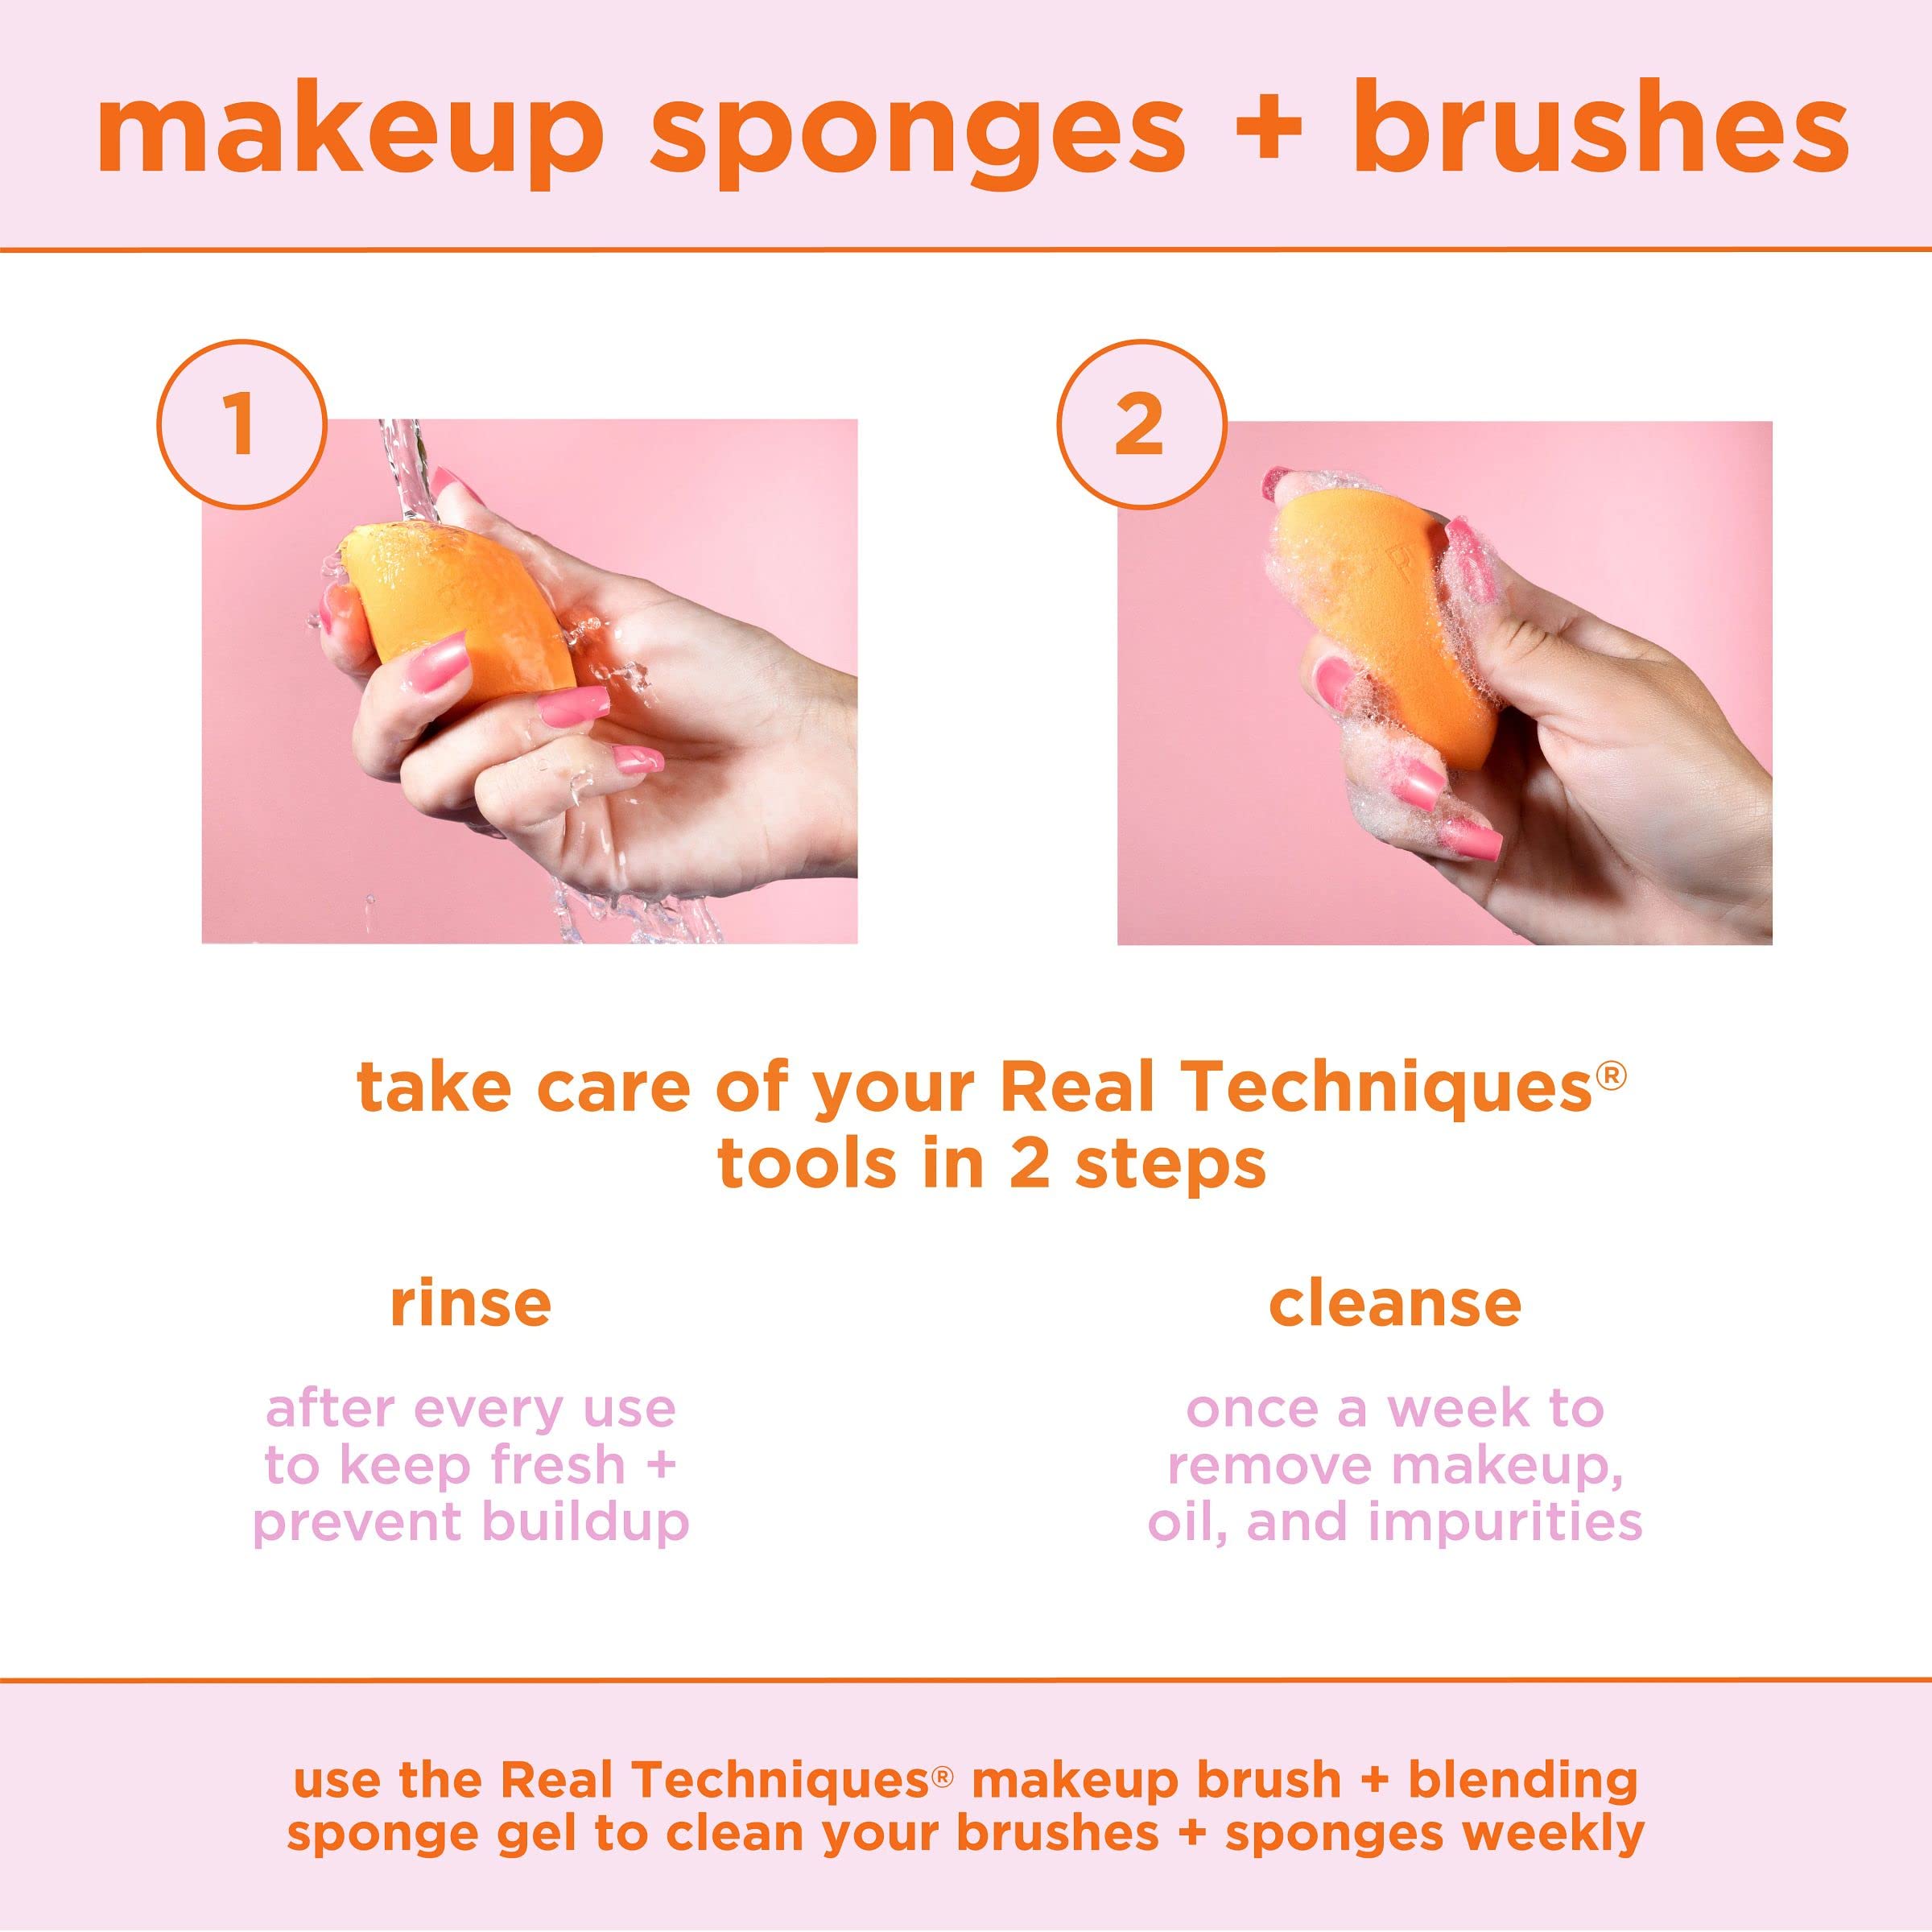 Real Techniques Mini Miracle Complexion Sponges, Small Makeup Blending Sponges, For Foundation & Concealer, Mini Size for Under Eyes & Touch-Ups, Natural Makeup, Packaging May Vary, 4 Count